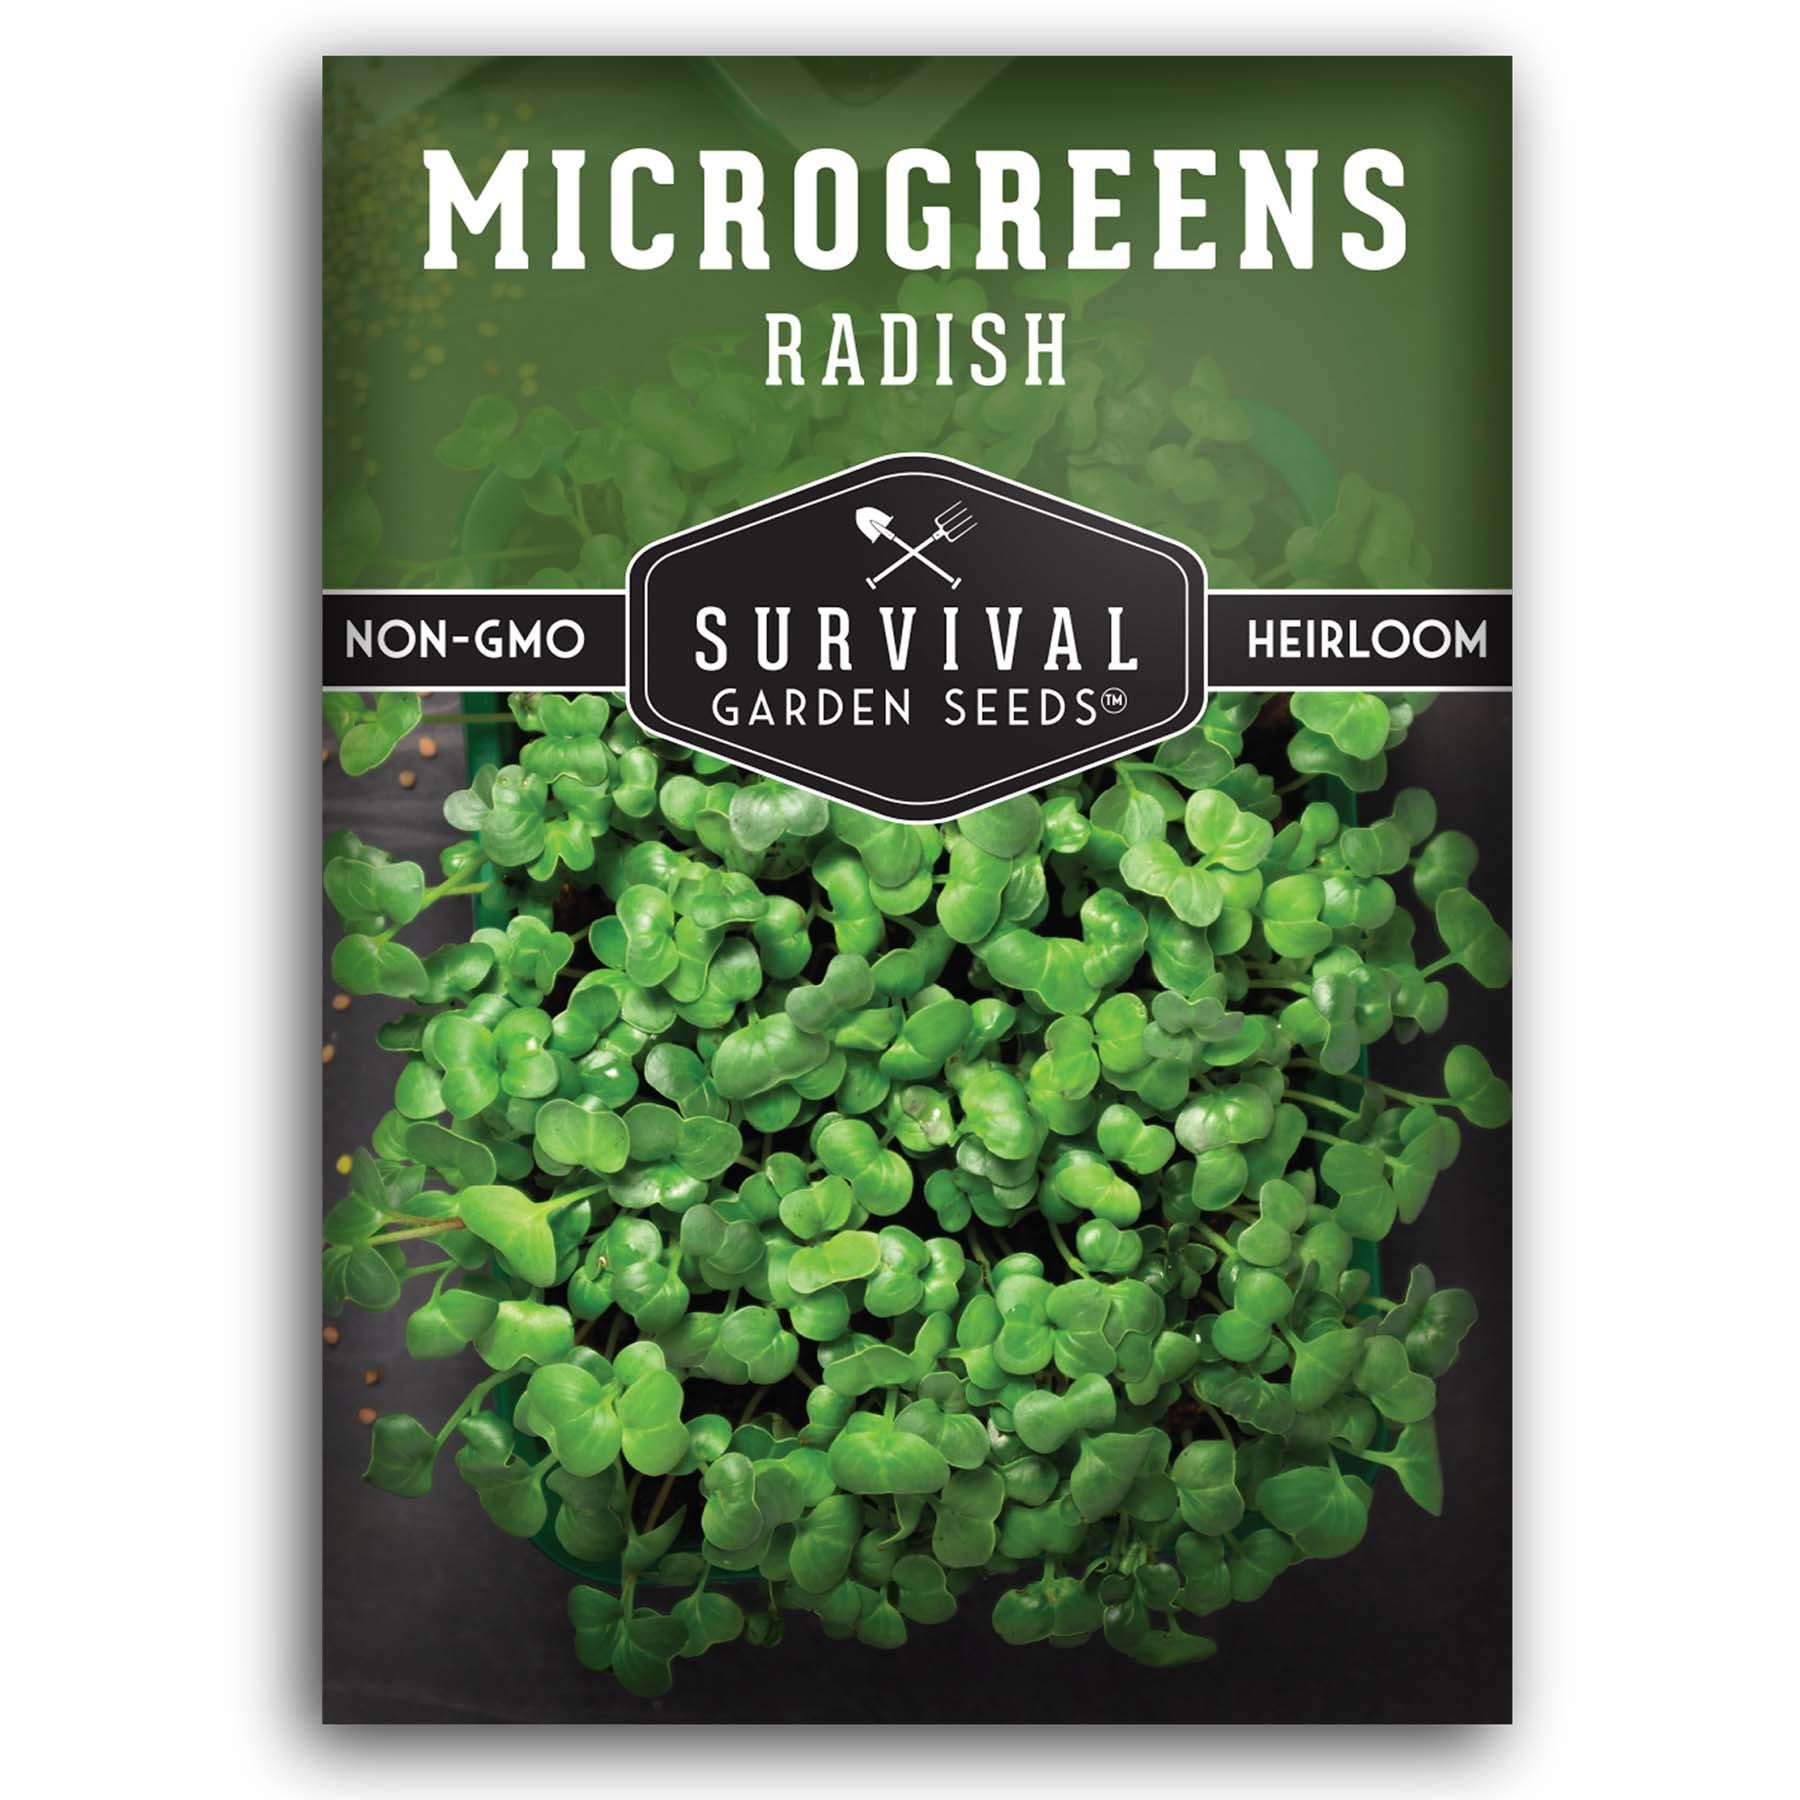 Radish Microgreens seeds for sprouting